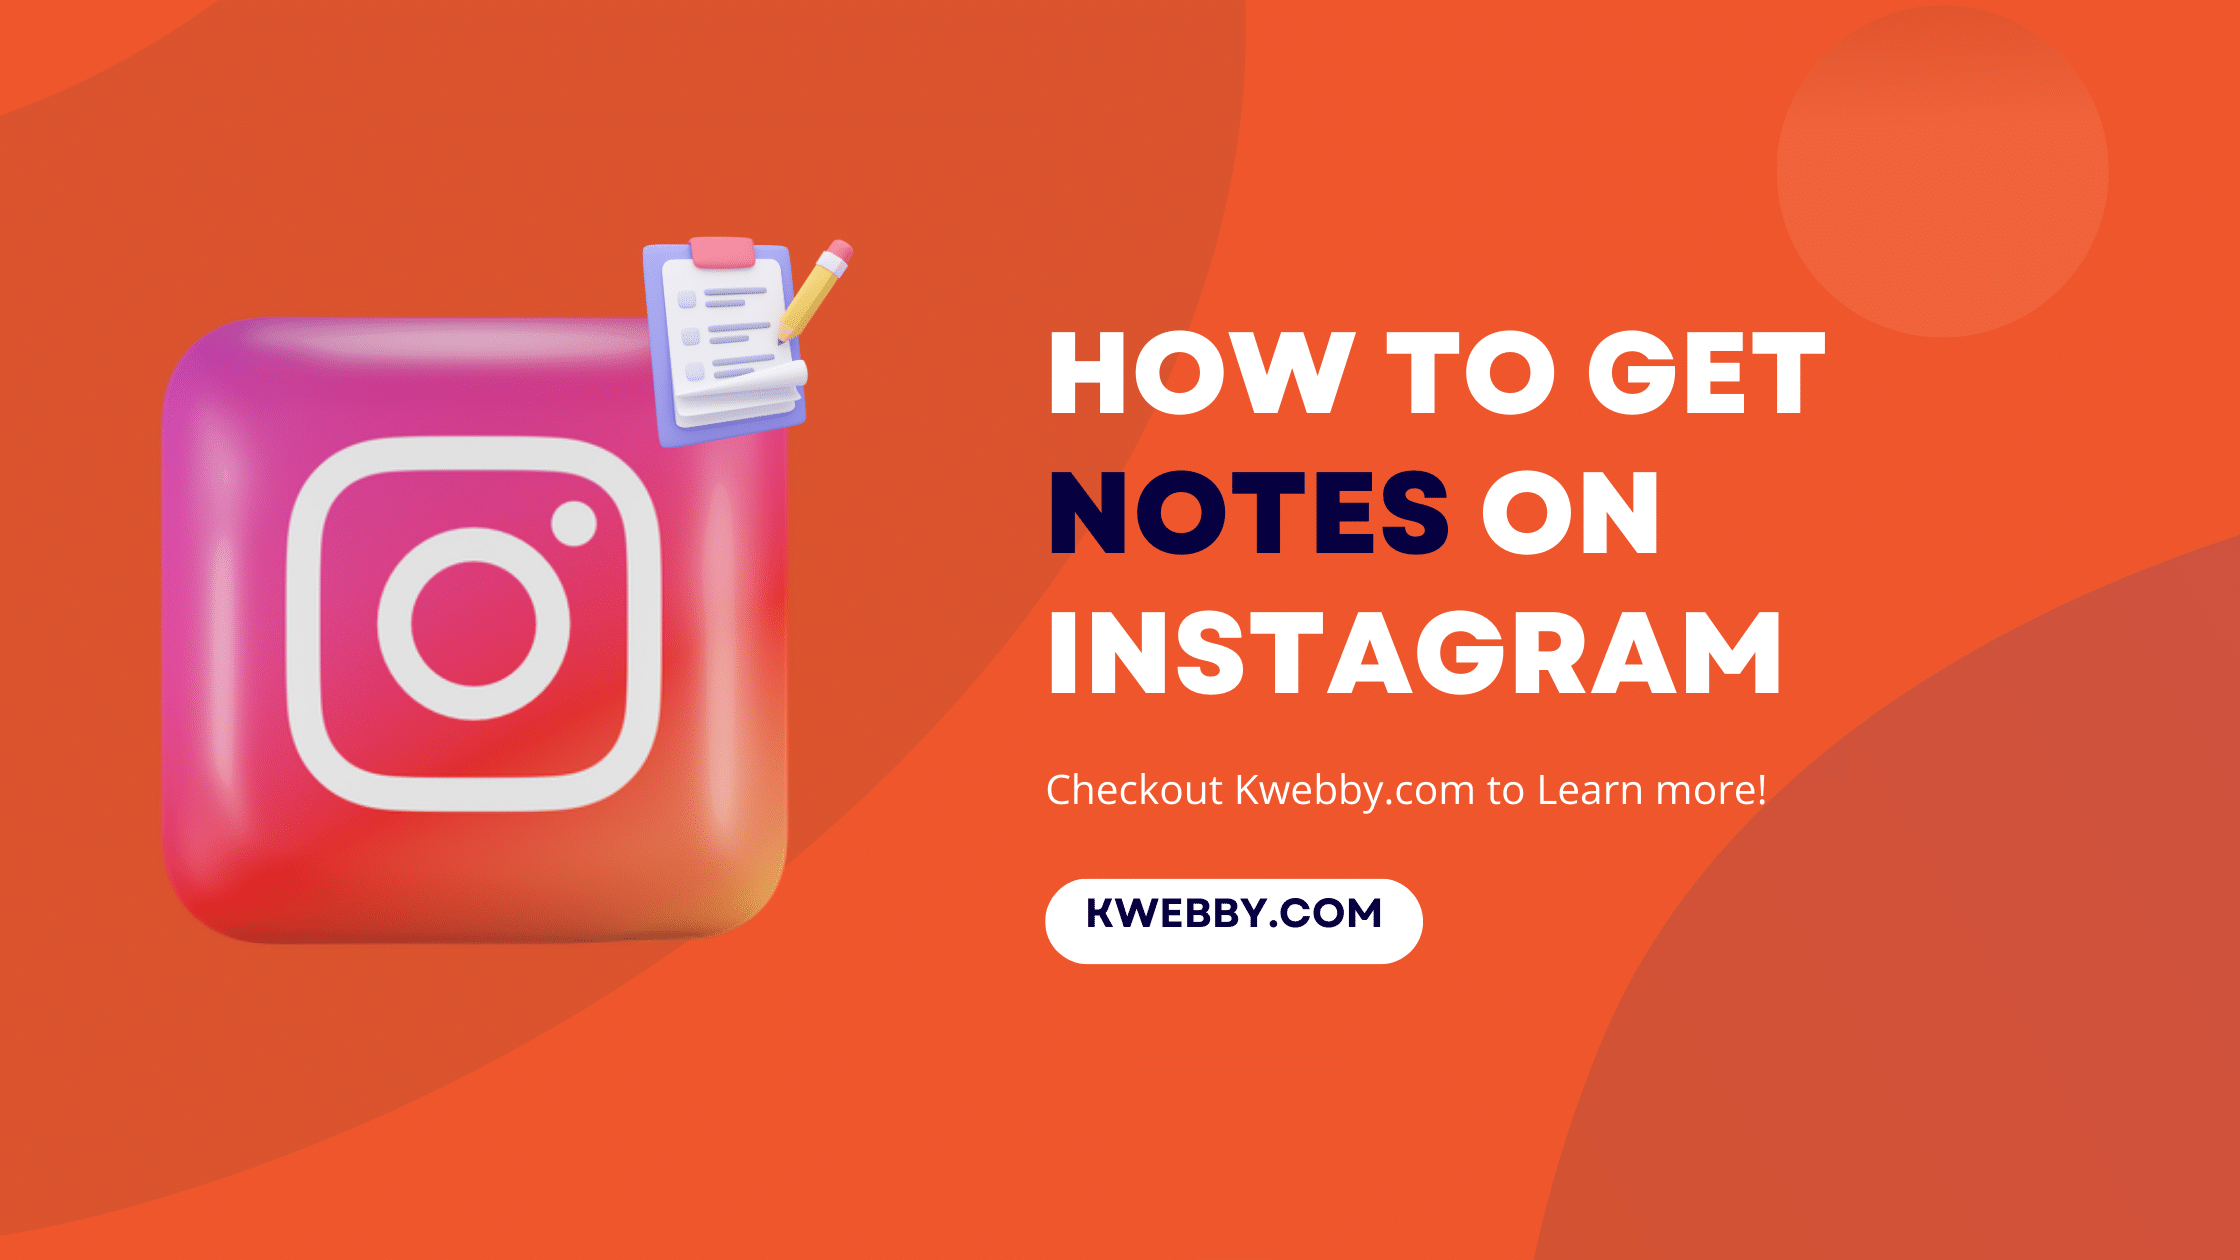 How to Get Notes on Instagram